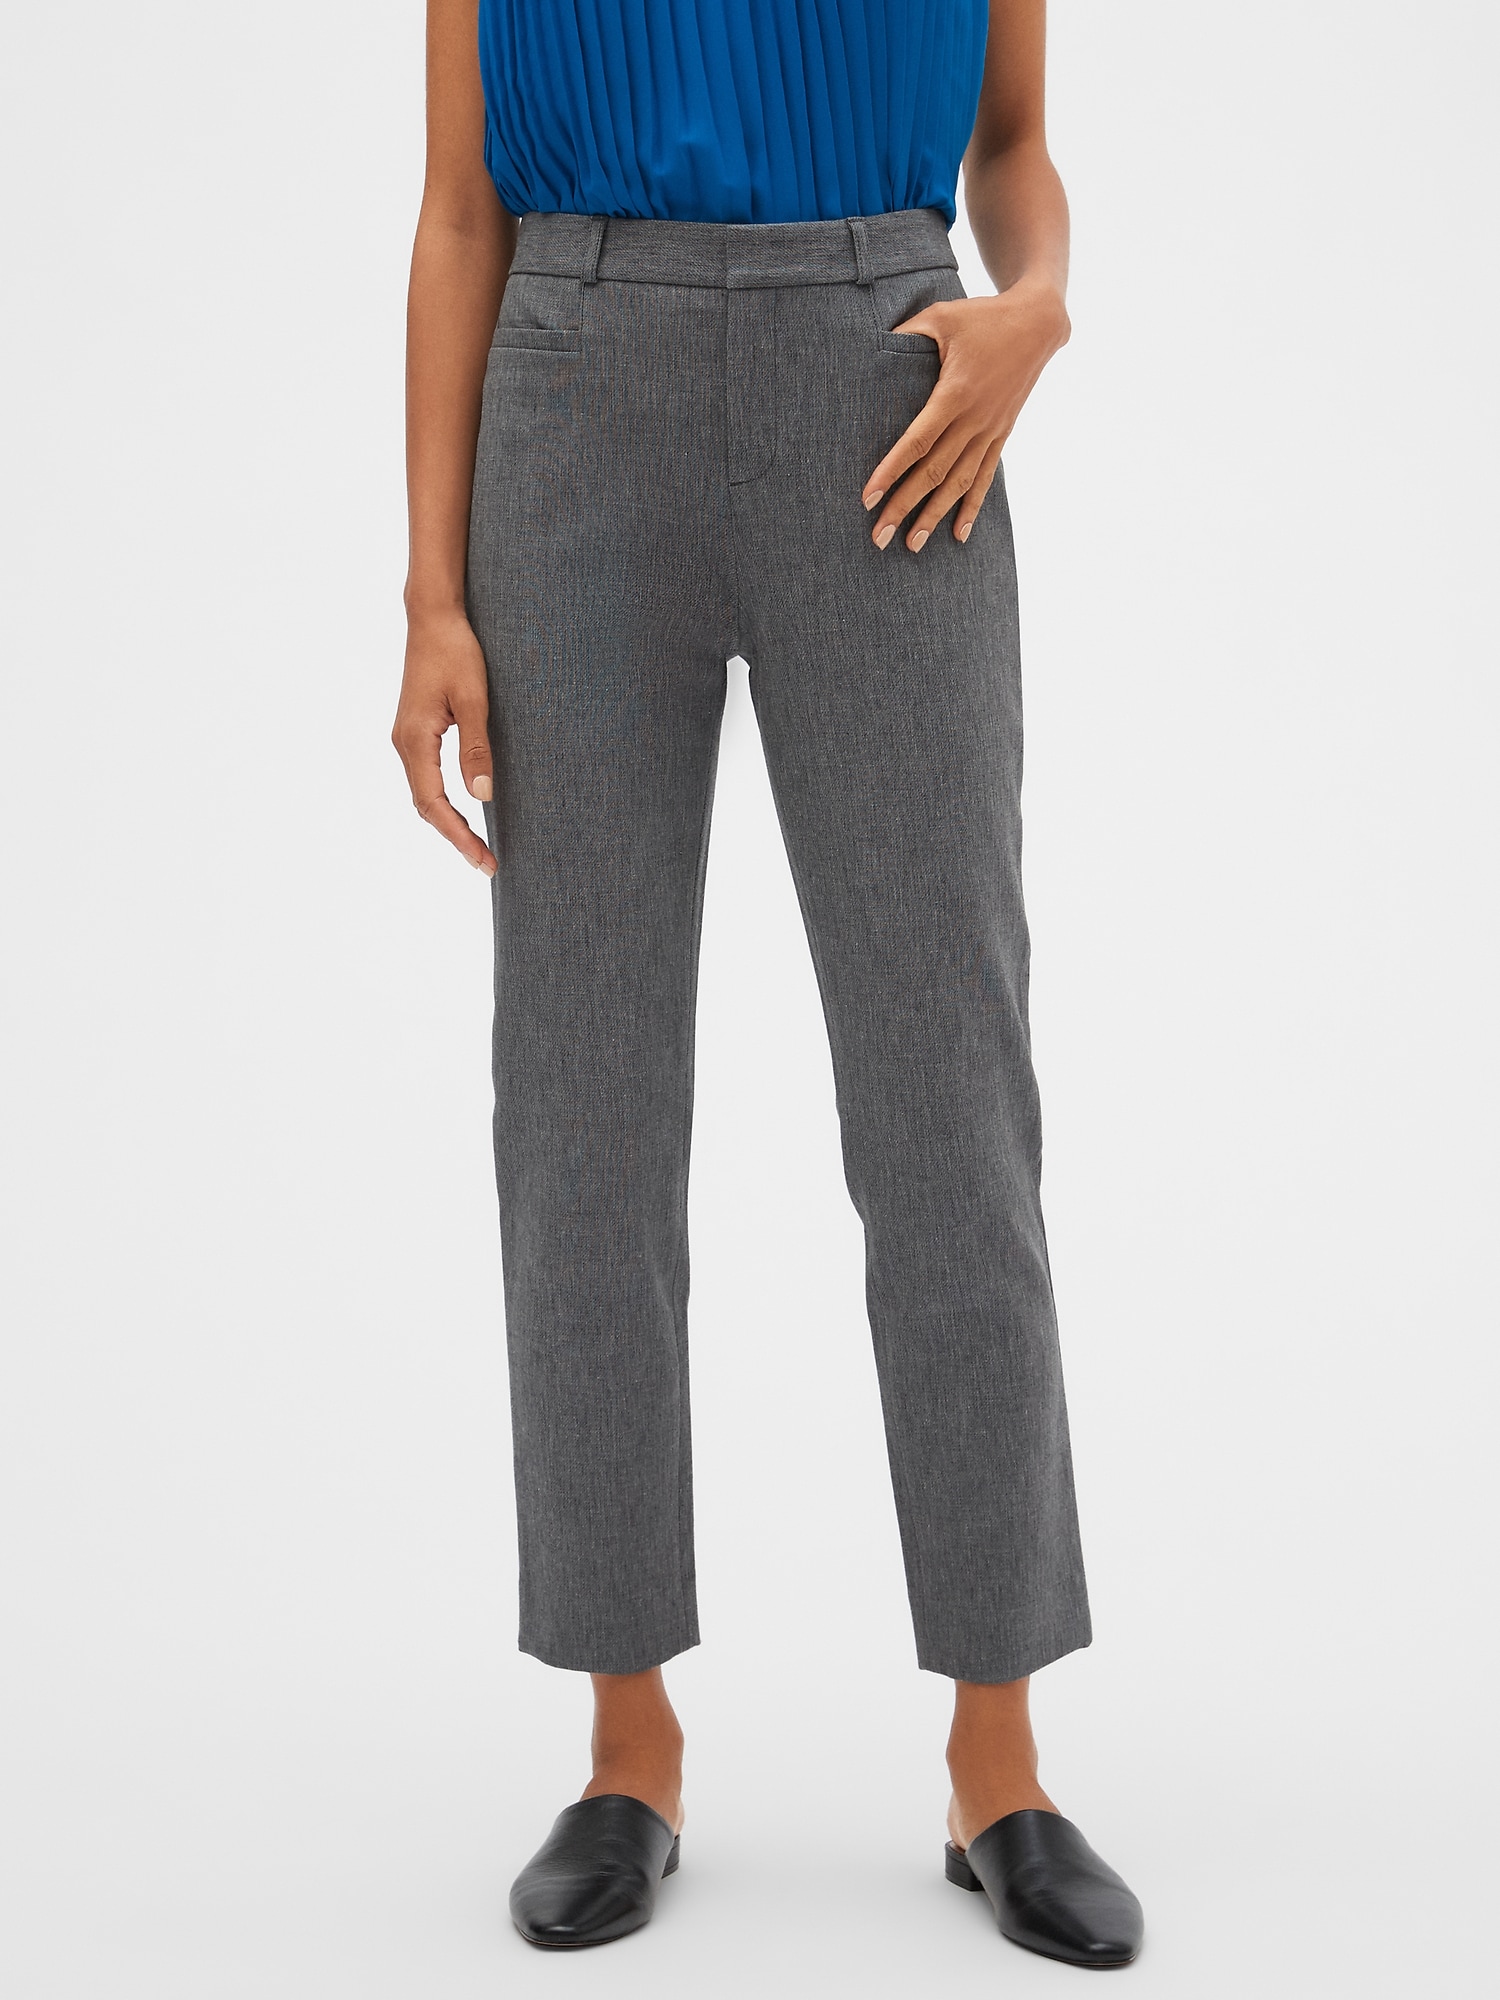 Petite High Rise Sloan Charcoal Heather Slim Ankle Pant